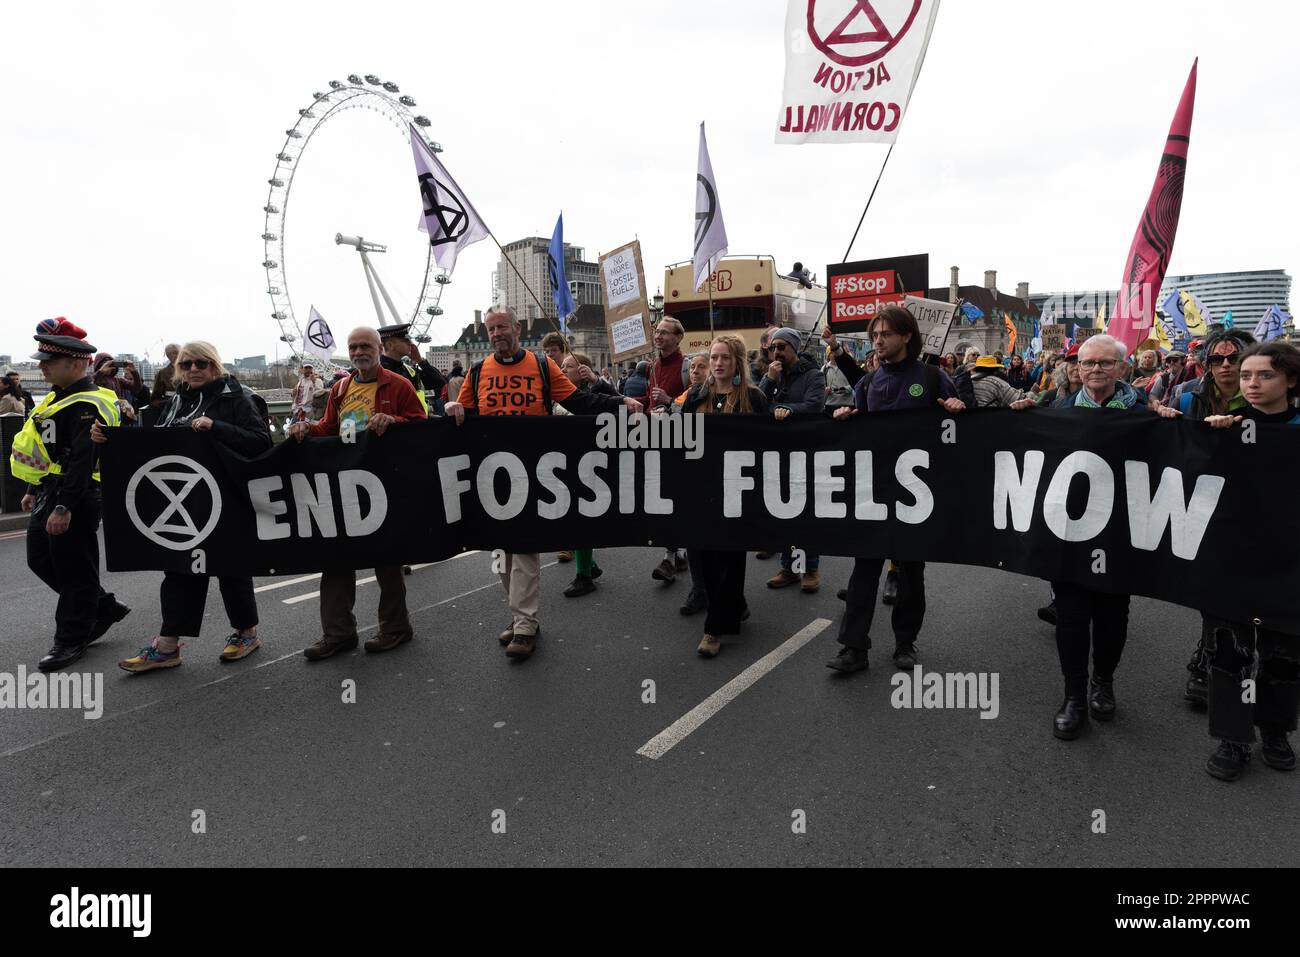 London, UK. 24 April, 2023. Climate activists stage a 'March To End Fossil Fuels', from Parliament Square to the HQ of Shell oil company, on the final day of protests initiated by Extinction Rebellion and supported by more than 200 organisations, including environmental groups, NGO's, and unions. In order to address the climate emergency they are demanding government stop the licencing, funding and approval of new fossil fuel projects, and create 'Citizen Assemblies' to tackle the climate crisis. Credit: Ron Fassbender/Alamy Live News. Stock Photo